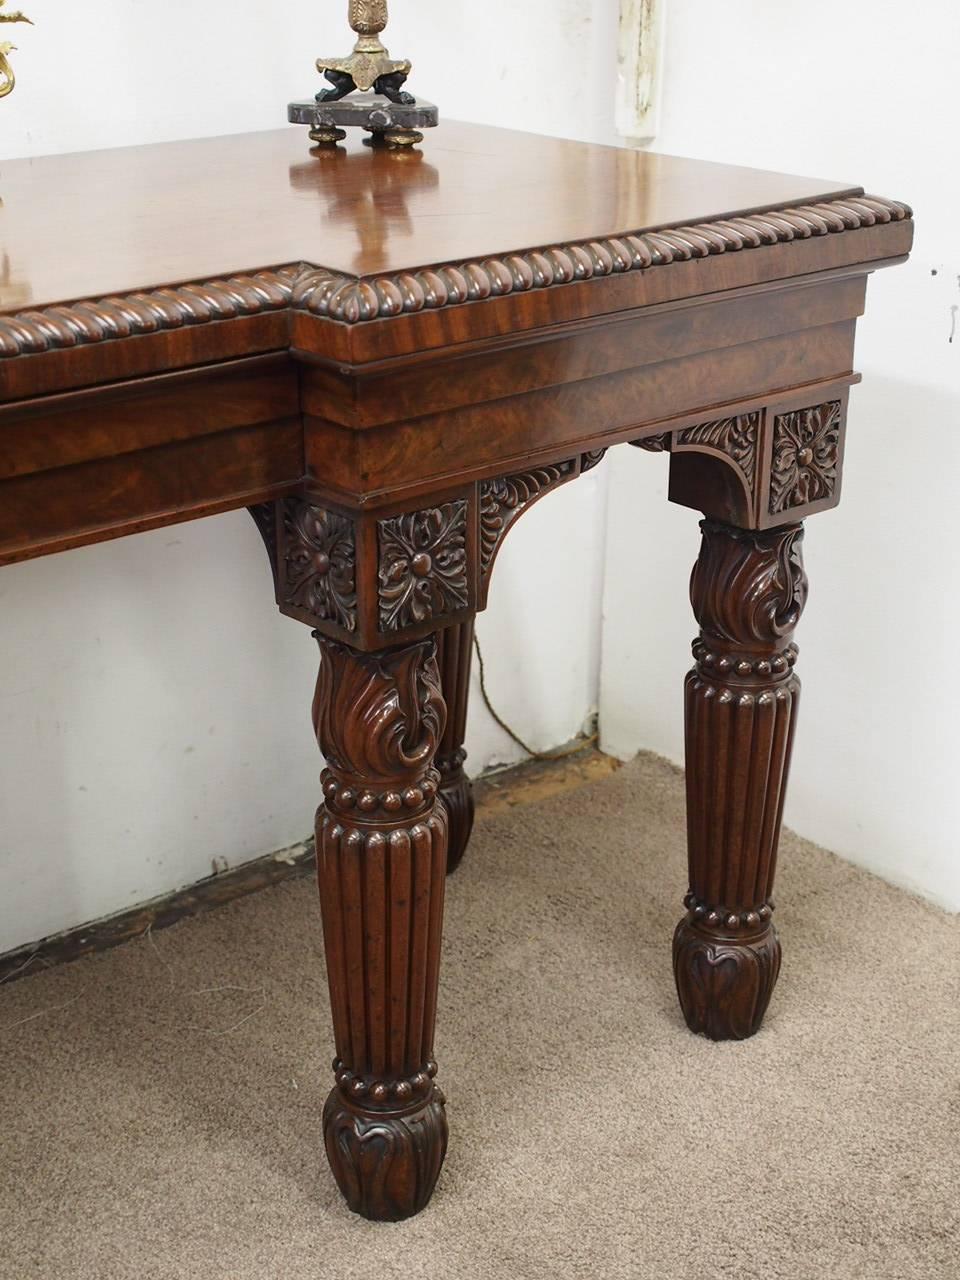 Regency inverted breakfront hall or serving table in Spanish flame mahogany, circa 1820. The inverted breakfront top is in mirror matched Spanish mahogany with a gadrooned edge above a deep moulded frieze. It has a centre drawer to the frieze, and